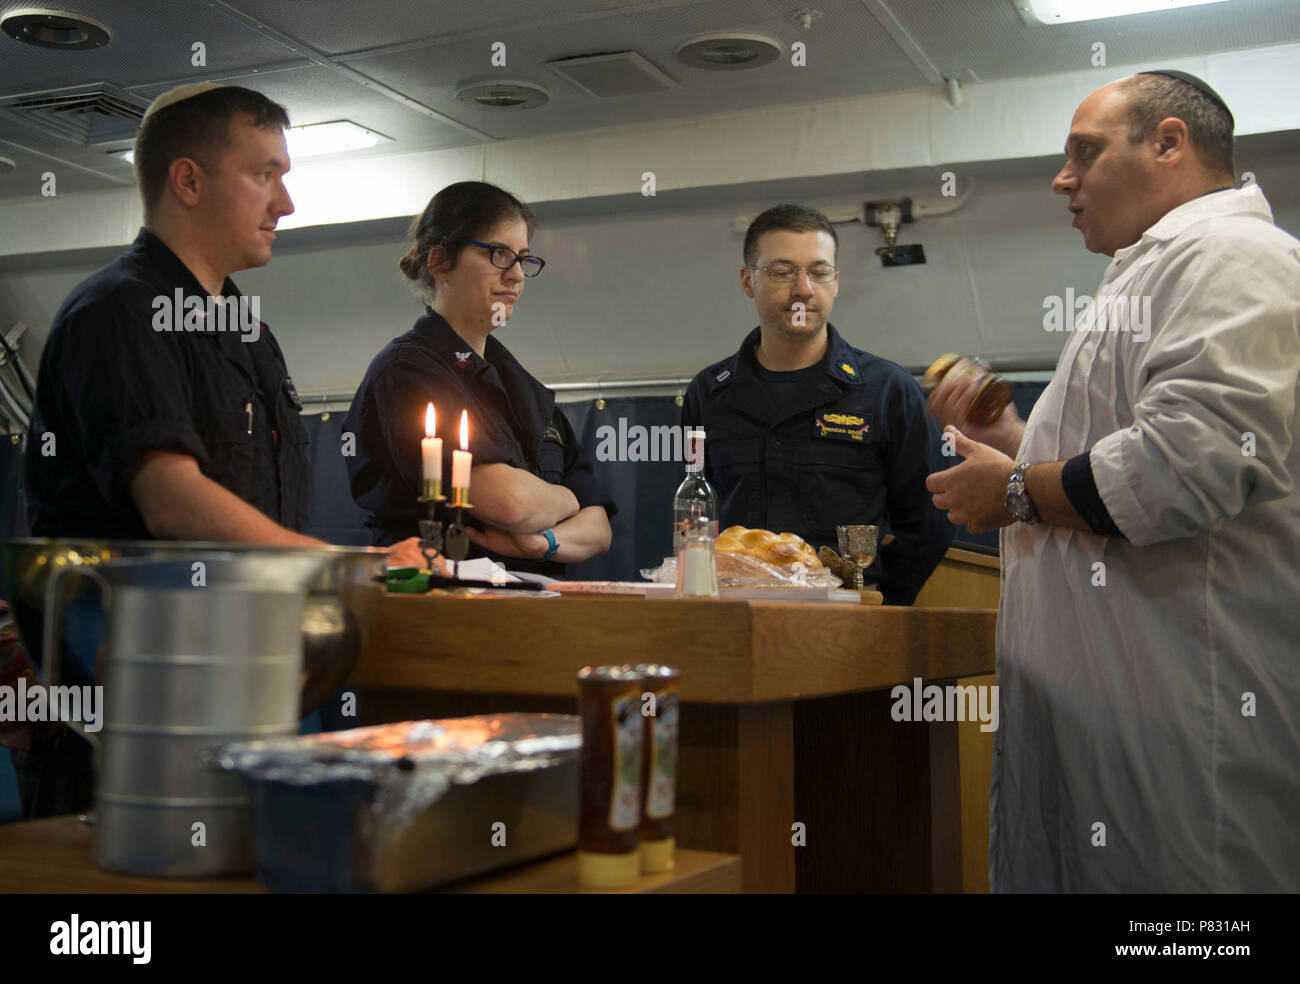 PACIFIC OCEAN (Oct. 2, 2016) Lt. Josh Sherwin, a Navy chaplain, leads a discussion about personal achievements over the previous year during a Rosh Hashanah ceremony aboard USS John C. Stennis (CVN 74). Rosh Hashanah is a two-day celebration of the Jewish New Year that provides an opportunity to reflect on the past year and look ahead in the New Year. Sherwin, one of ten rabbis in the Navy, visited John C. Stennis at sea to provide religious services for the crew during the High Holy Days. John C. Stennis is underway conducting proficiency and sustainment training. Stock Photo